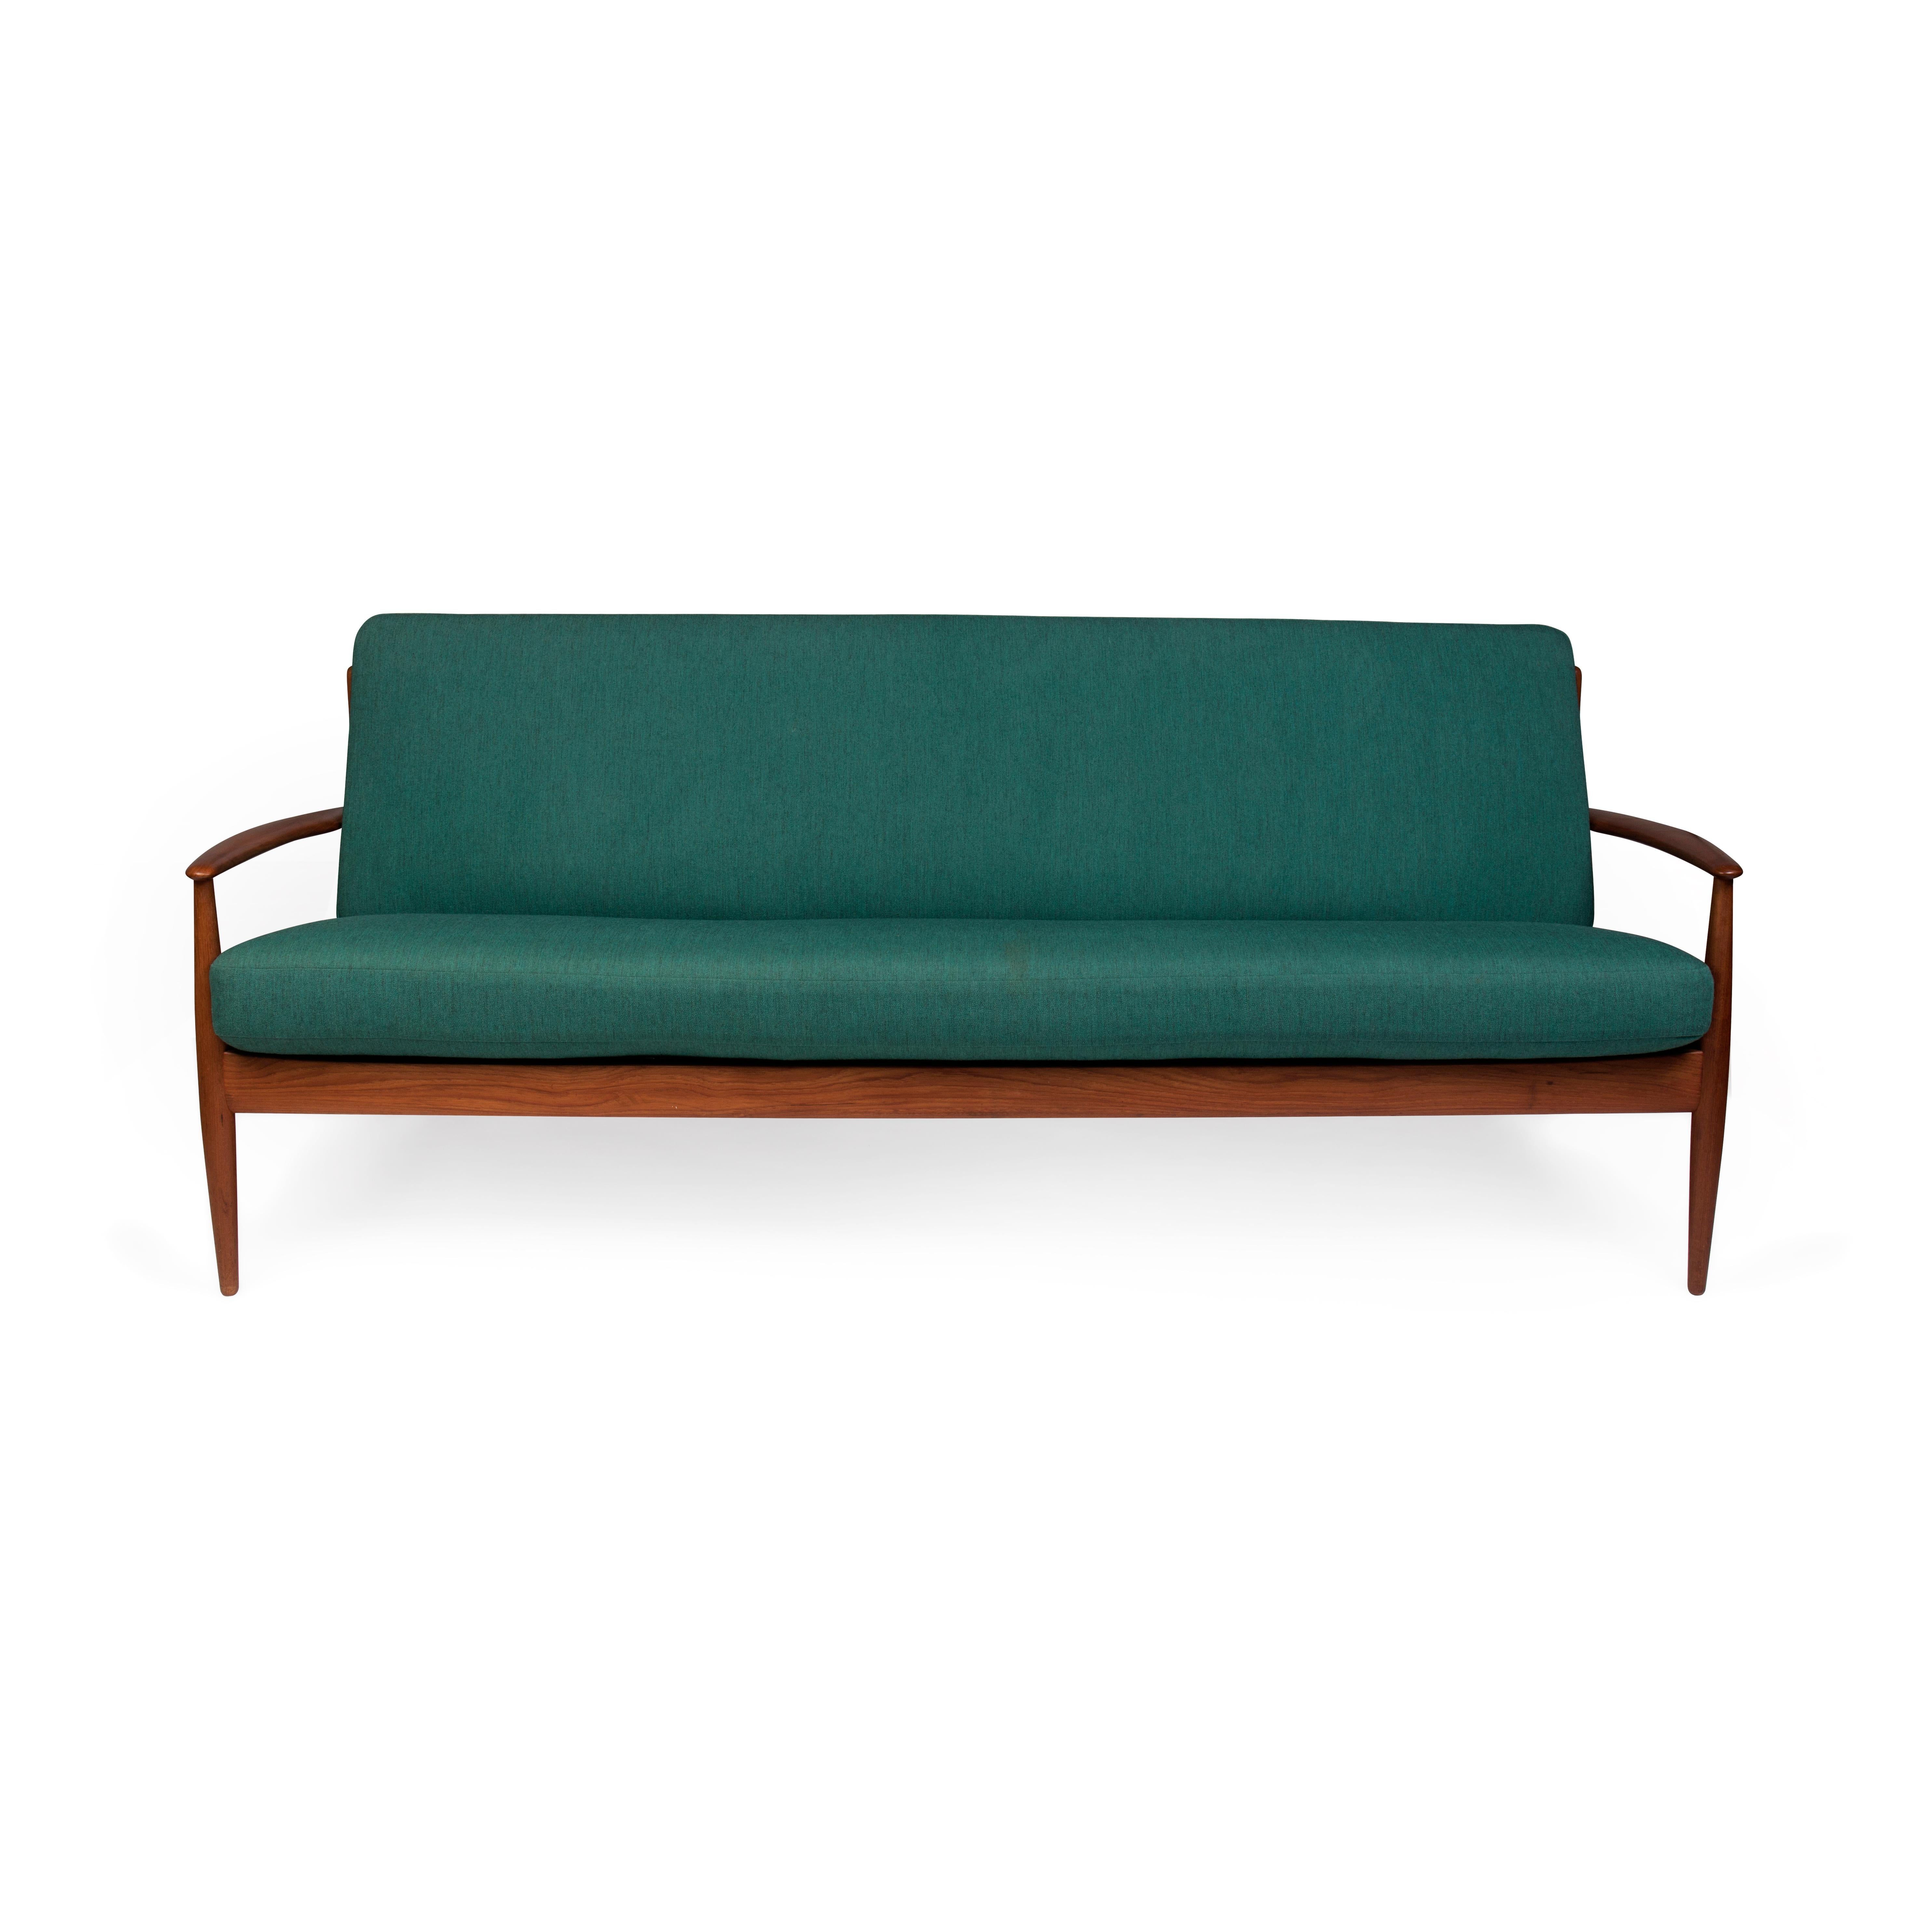 This rare teak sofa designed ca. 1952 by Grete Jalk (1920-2006) has its original seat and back cushions with spring coils. The cushions are upholstered with the original green fabric designed by Grete Jalk (verified by Grete Jalk